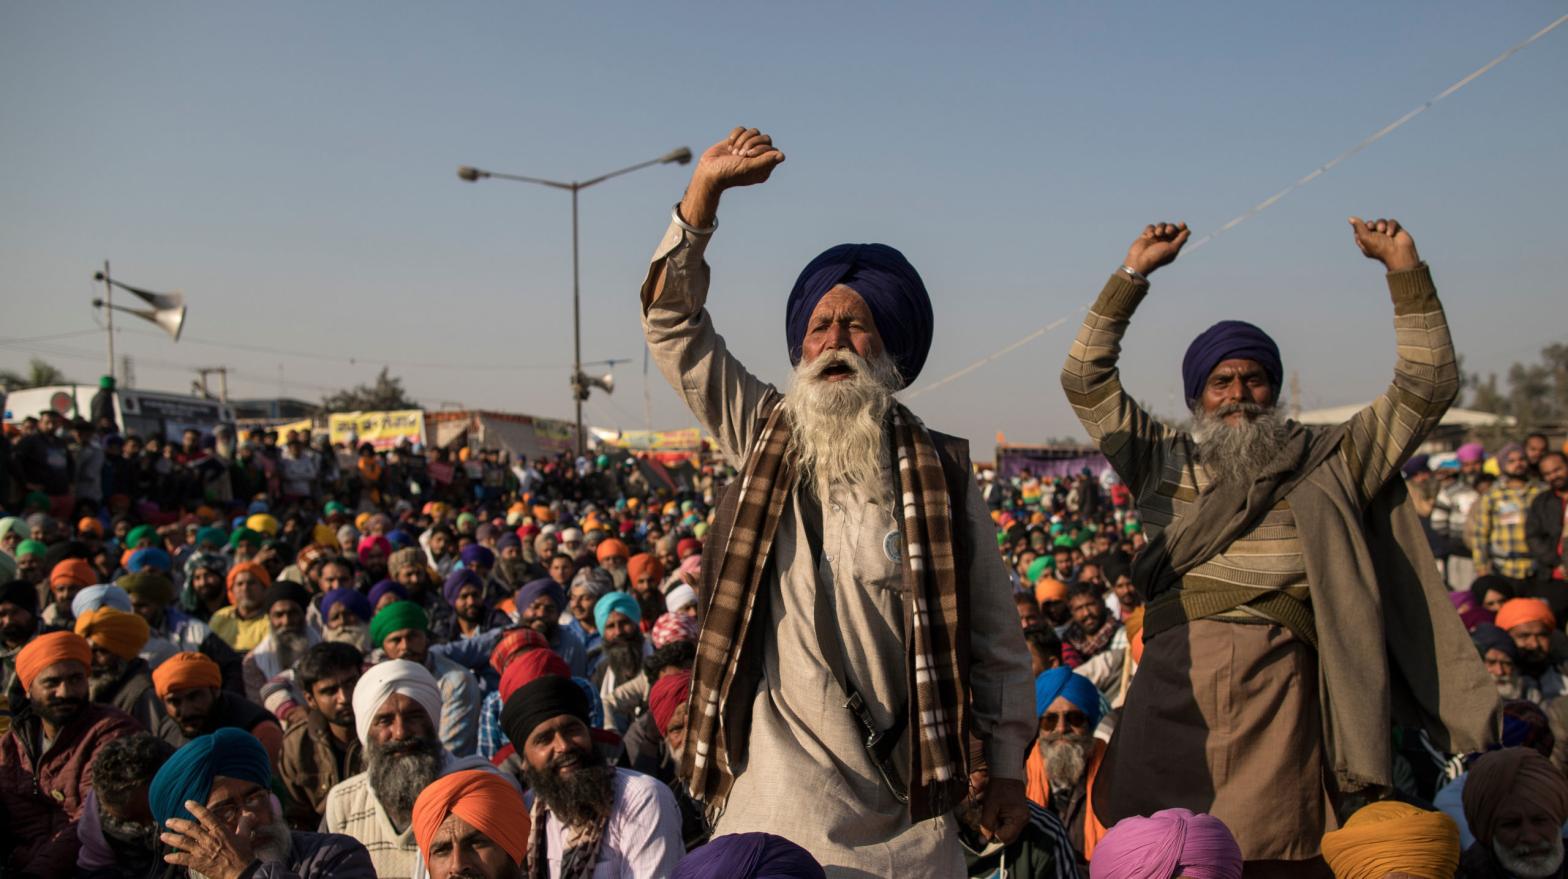 Farmers shout slogans as they participate in a protest at the Delhi Singhu border on December 18, 2020 in Delhi, India. (Photo: Anindito Mukherjee, Getty Images)